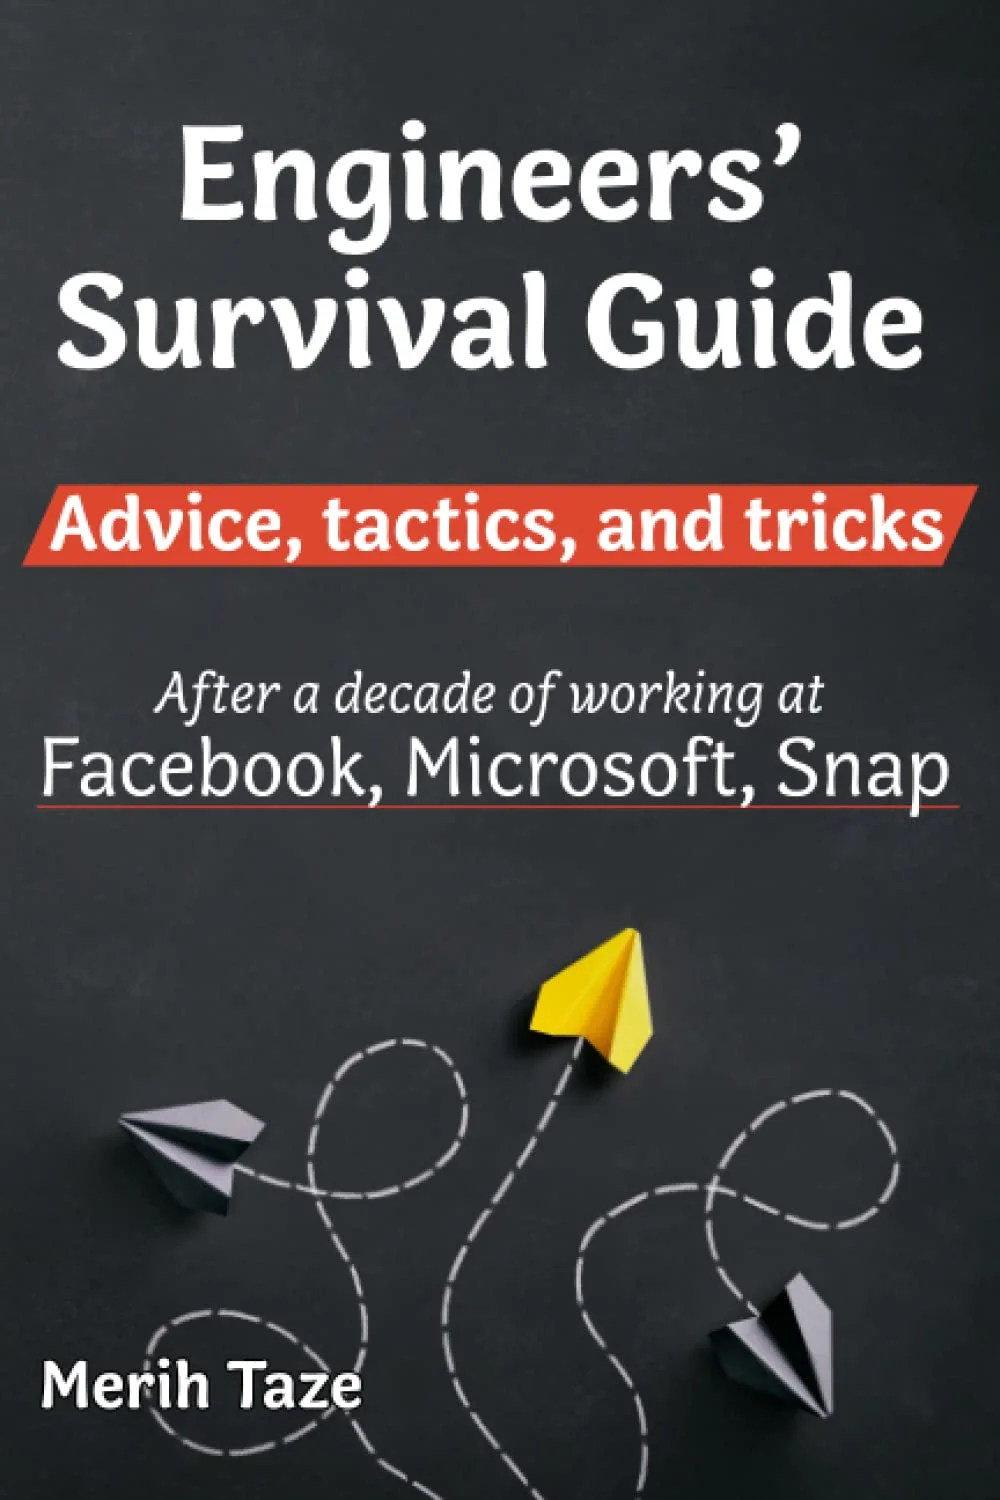 Cover of ‘Engineers’ Survival Guide’ book, offering professional advice for tech careers.